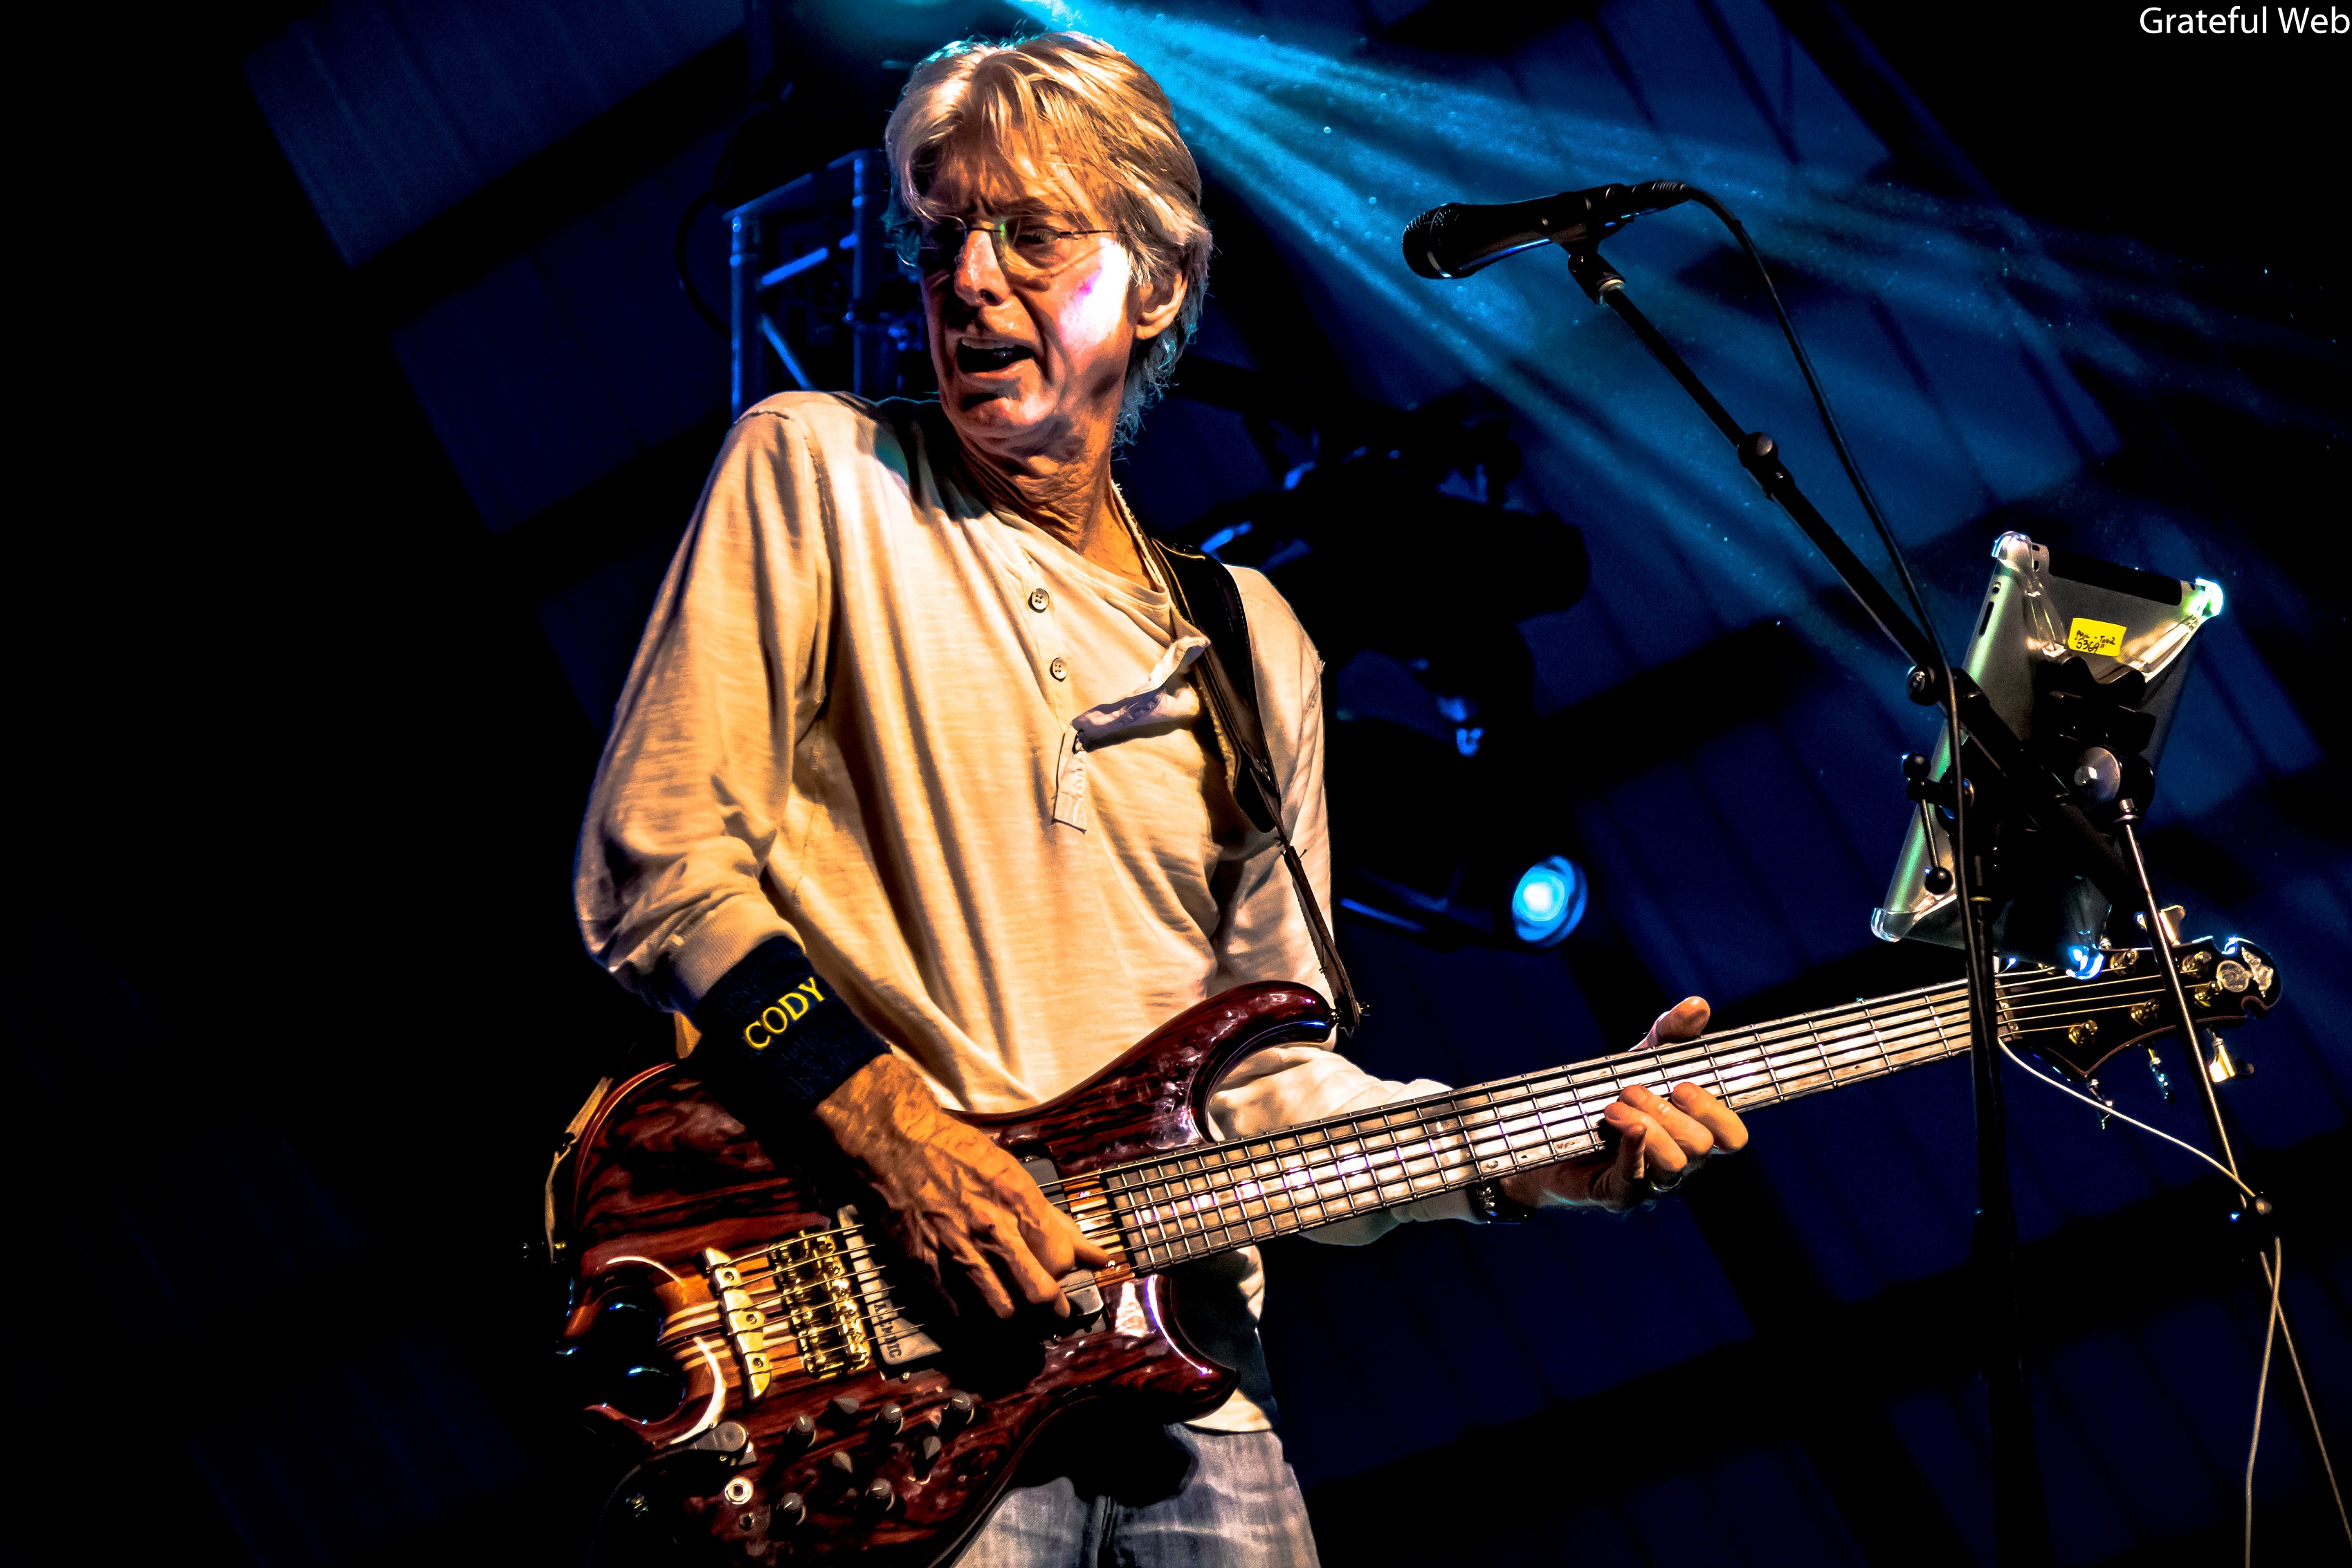 Phil Lesh & The Terrapin Family Band will play Friday, July 26th